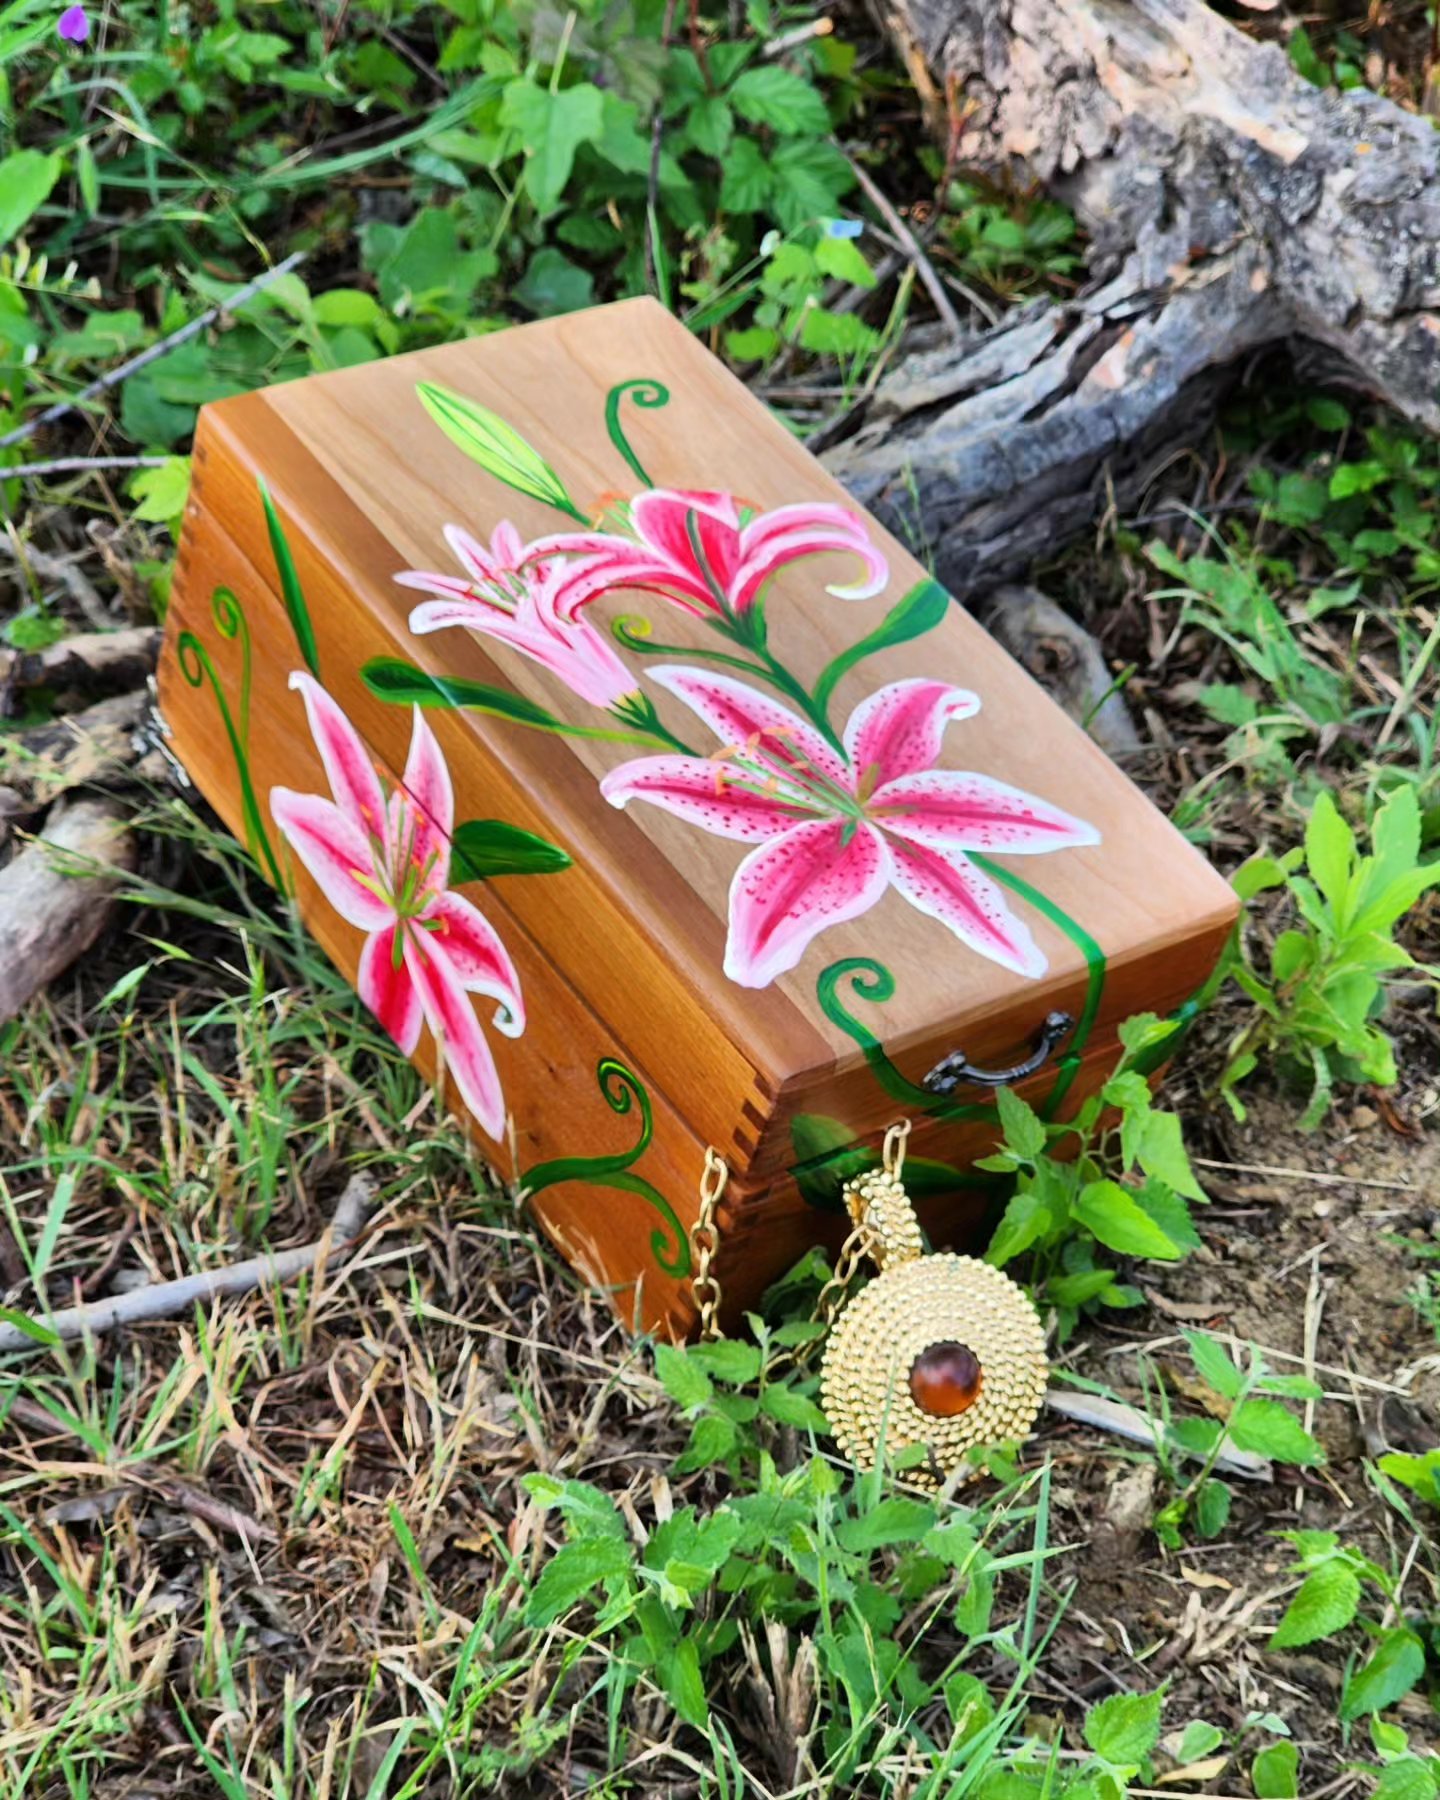 Antique handpainted wooden jewelry box with original design of a Stargazer Lily. This box includes fancy such as brass feet, handle, and a foam ring pad.